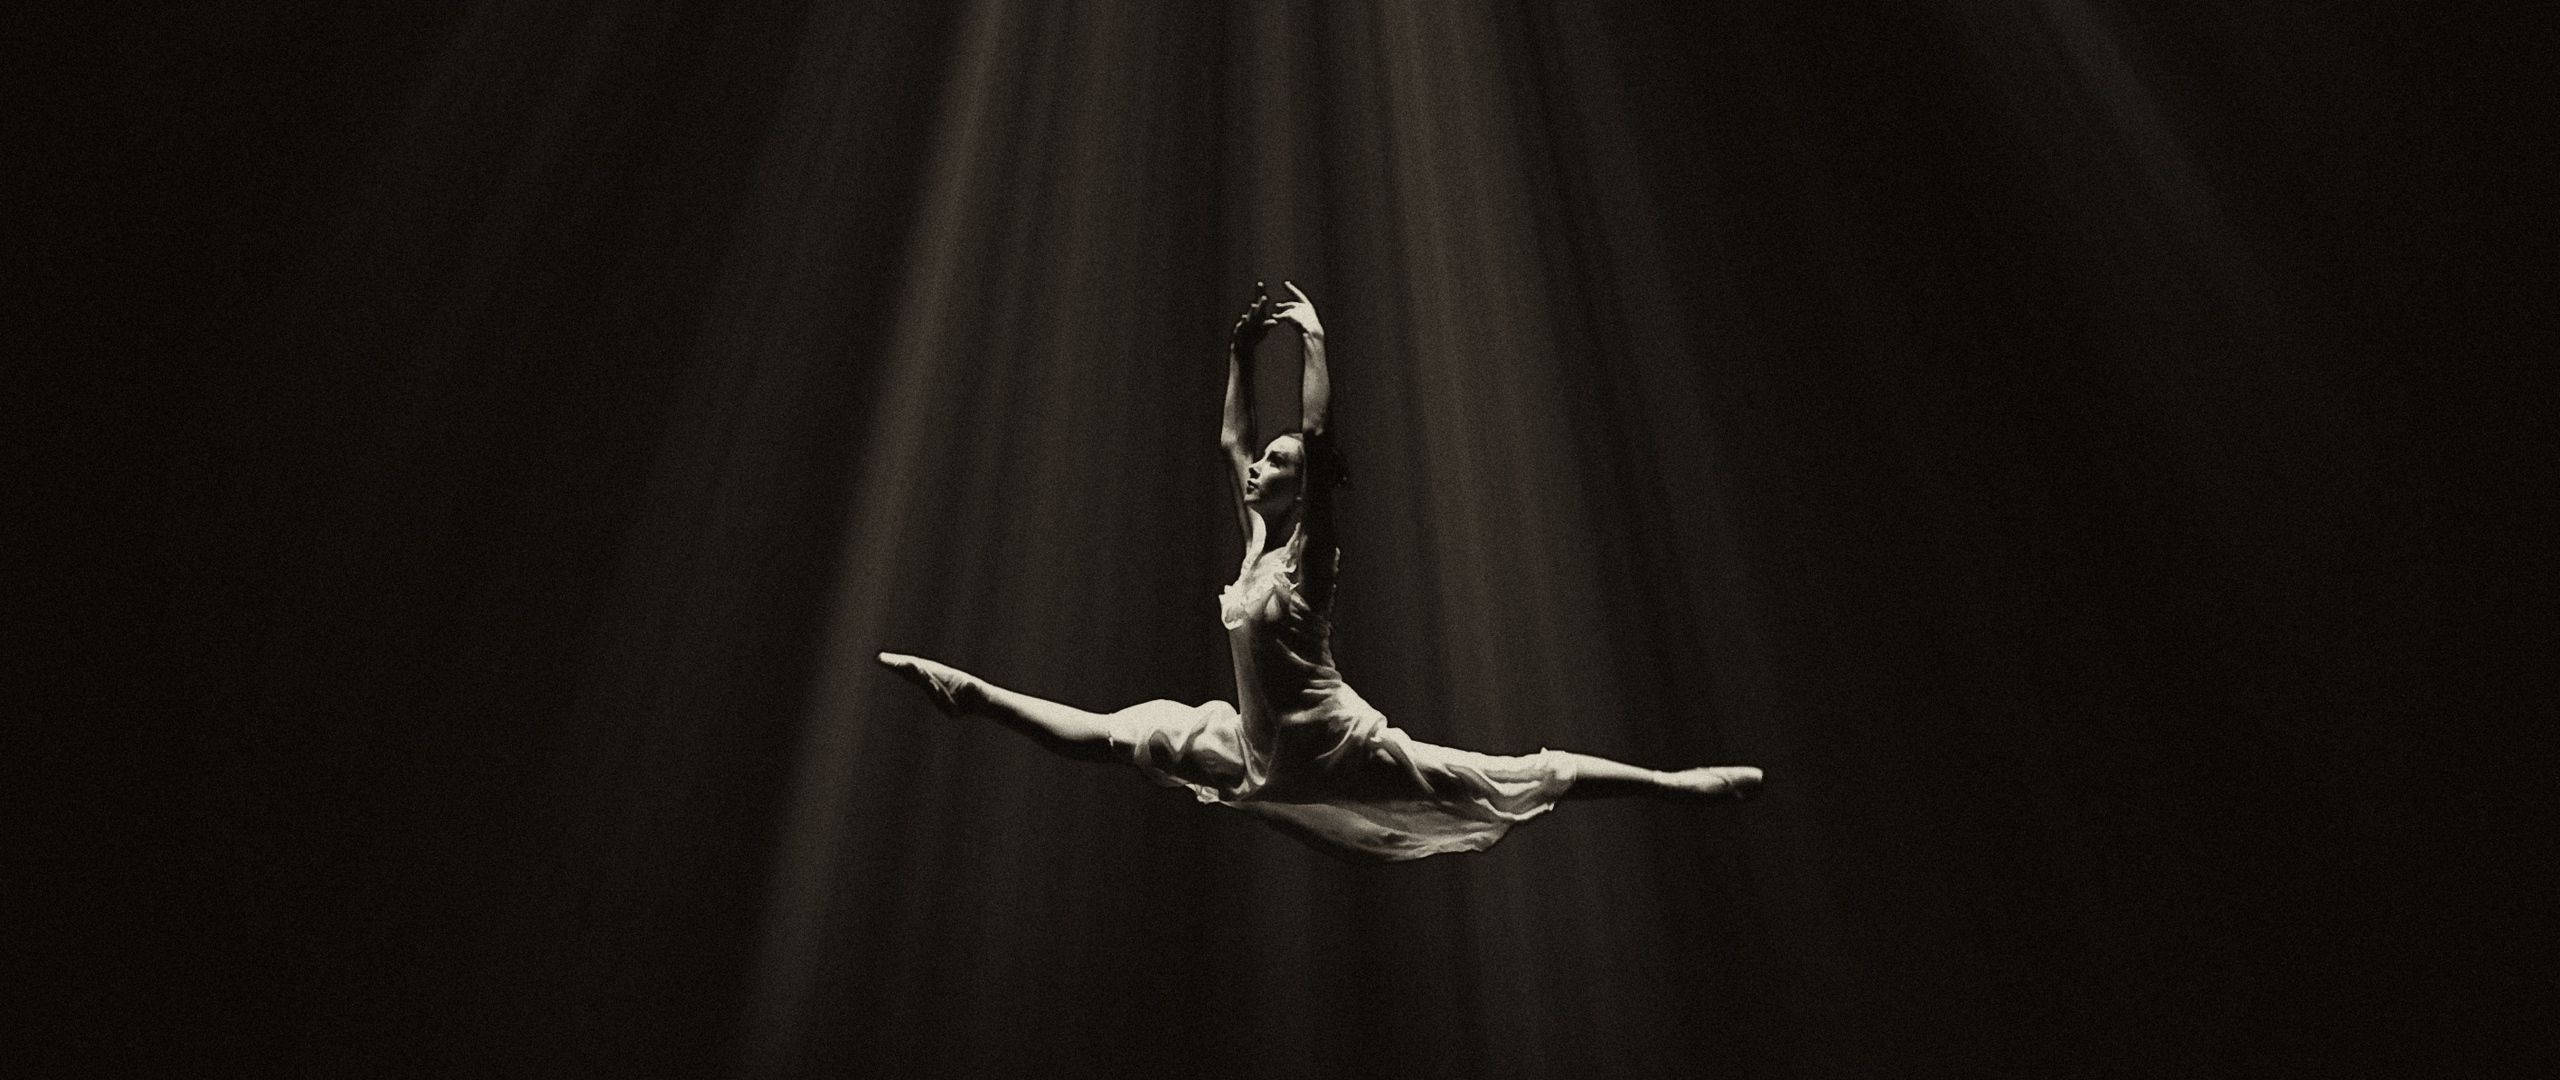 A woman doing an aerial act in the dark - Dance, ballet